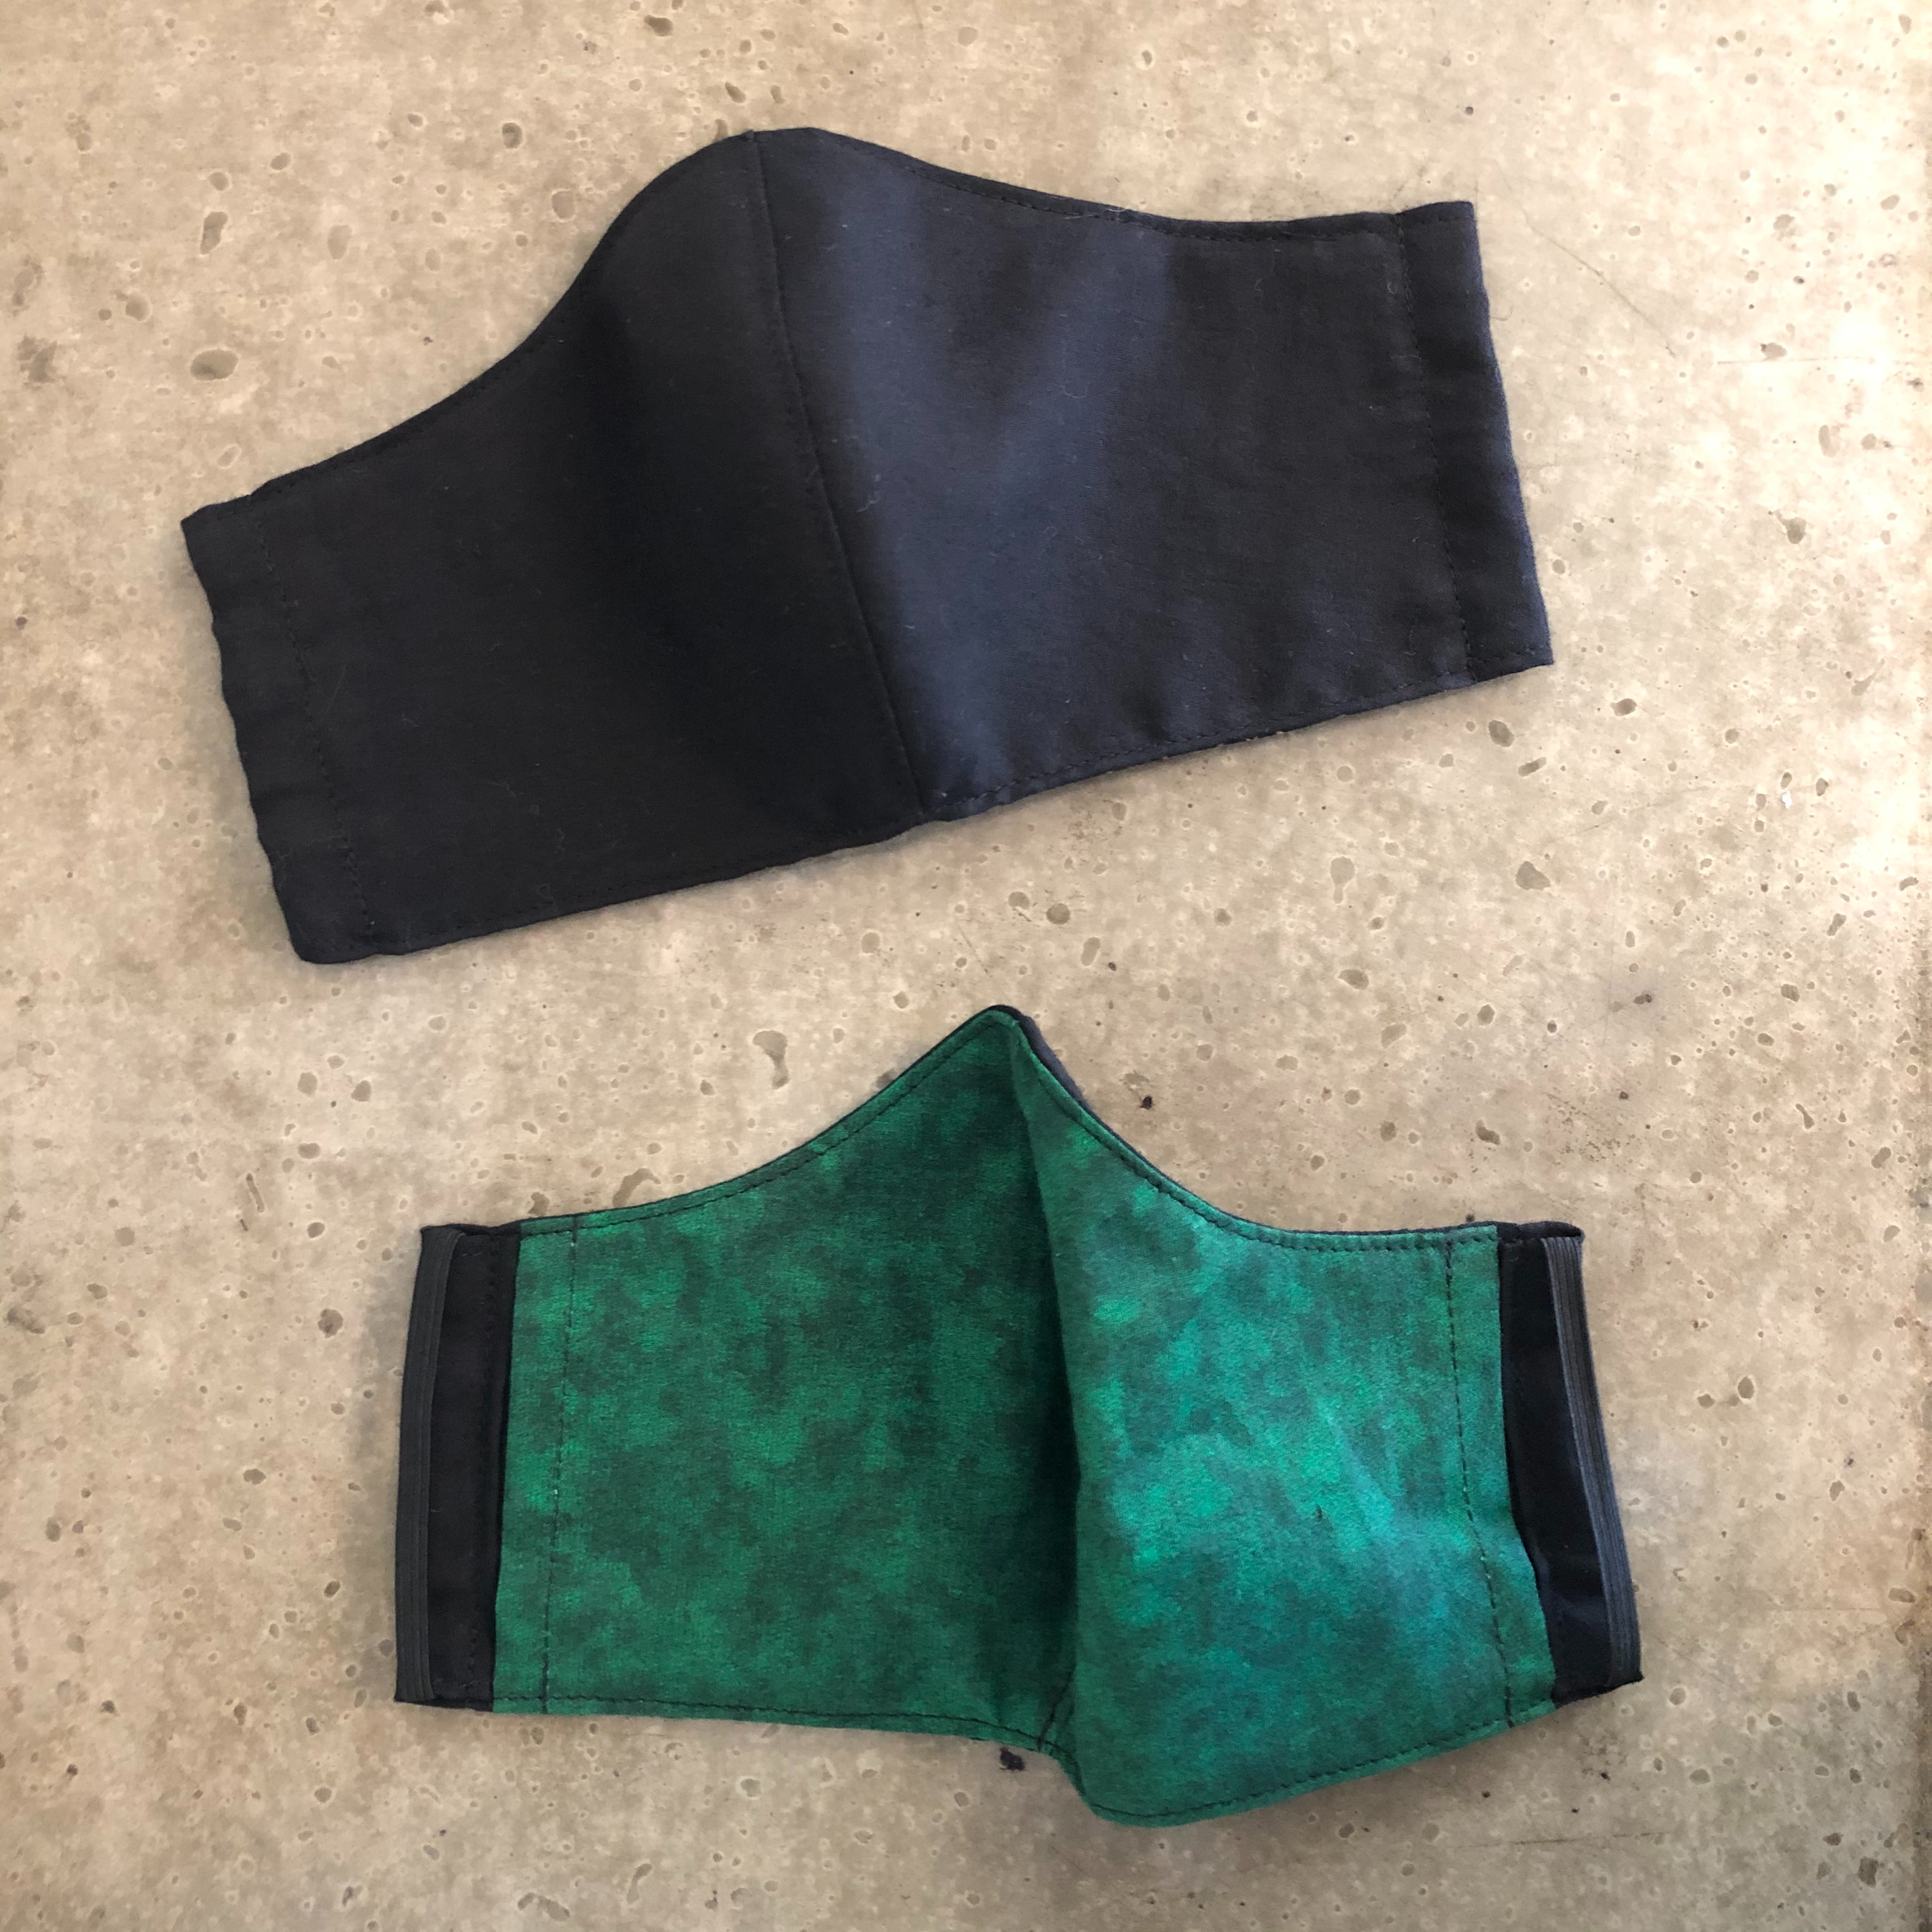 black face mask with green inside view of inside and outside